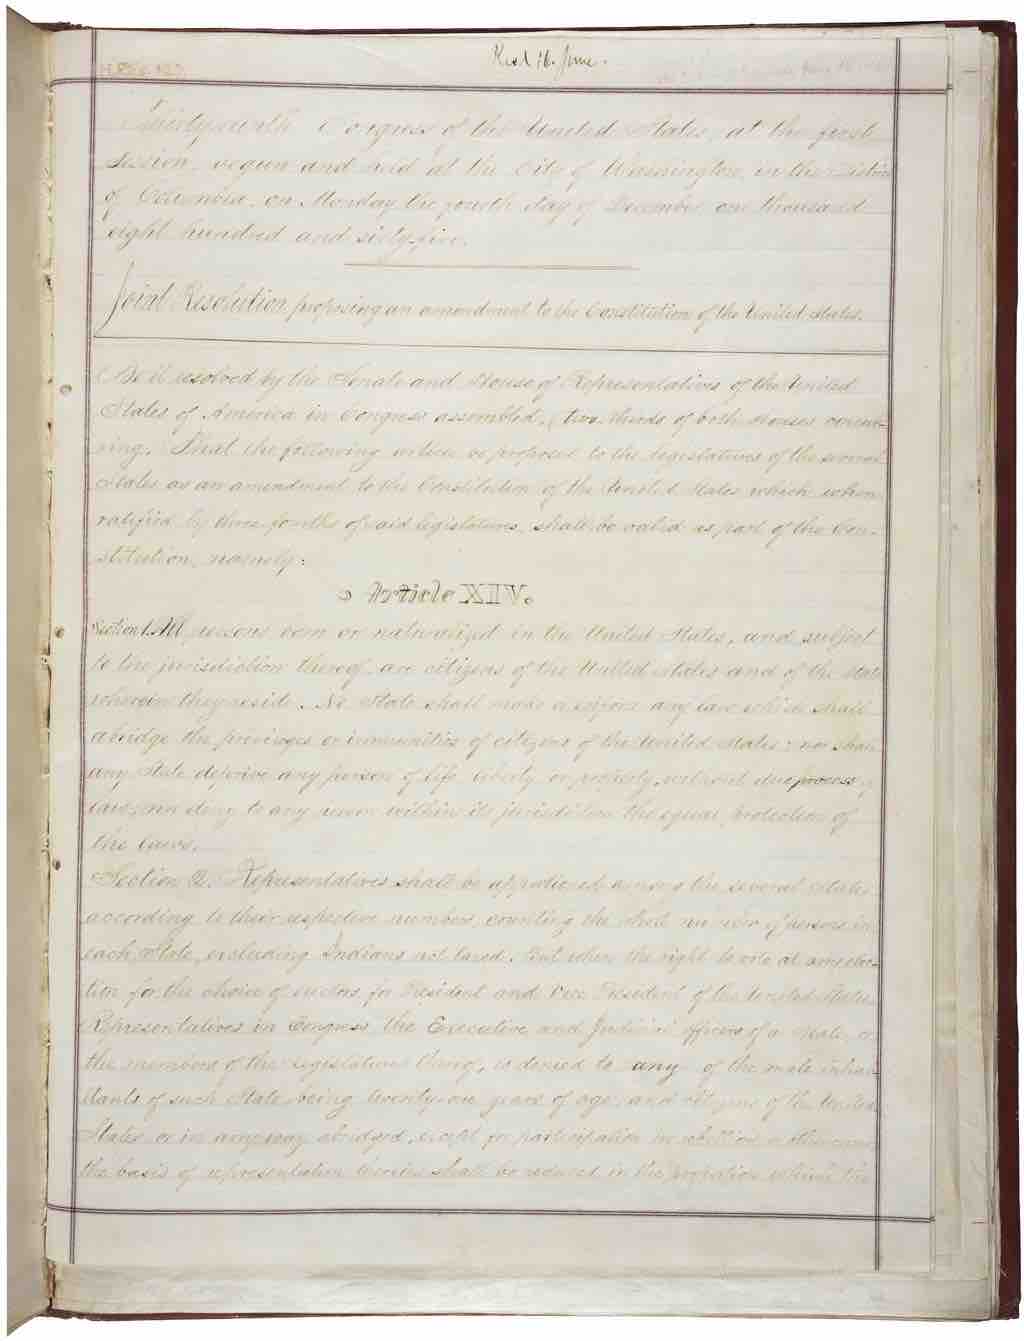 14th Amendment of the United States Constitution